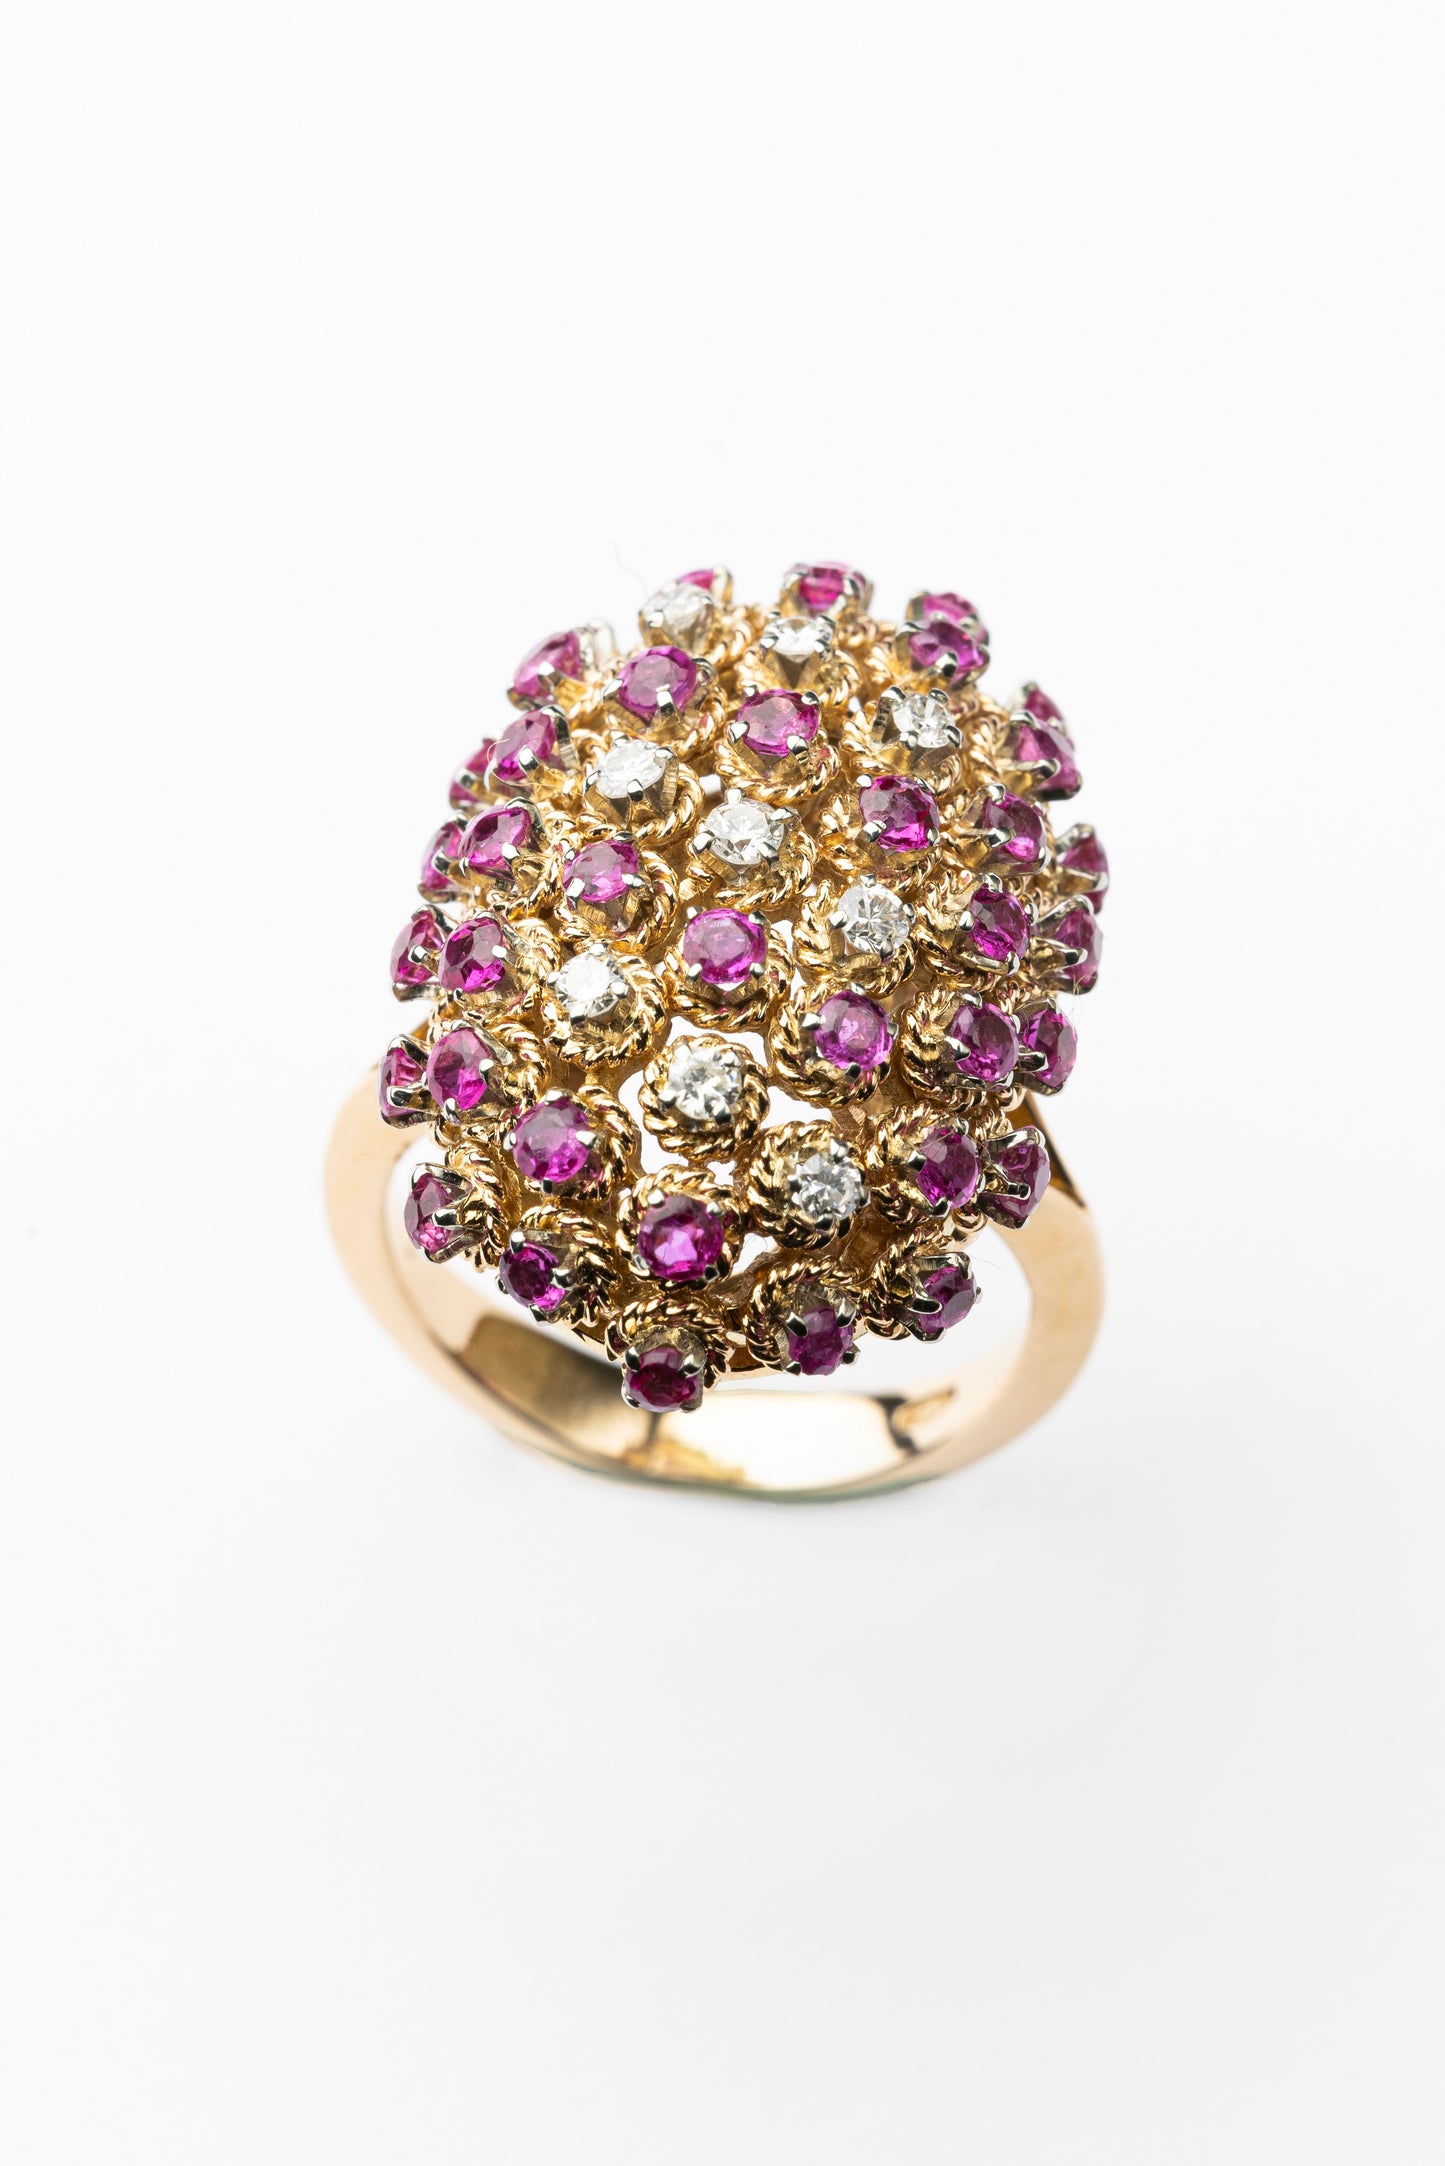 An 18 kt cocktail ring with diamonds and purplish/pink sapphires